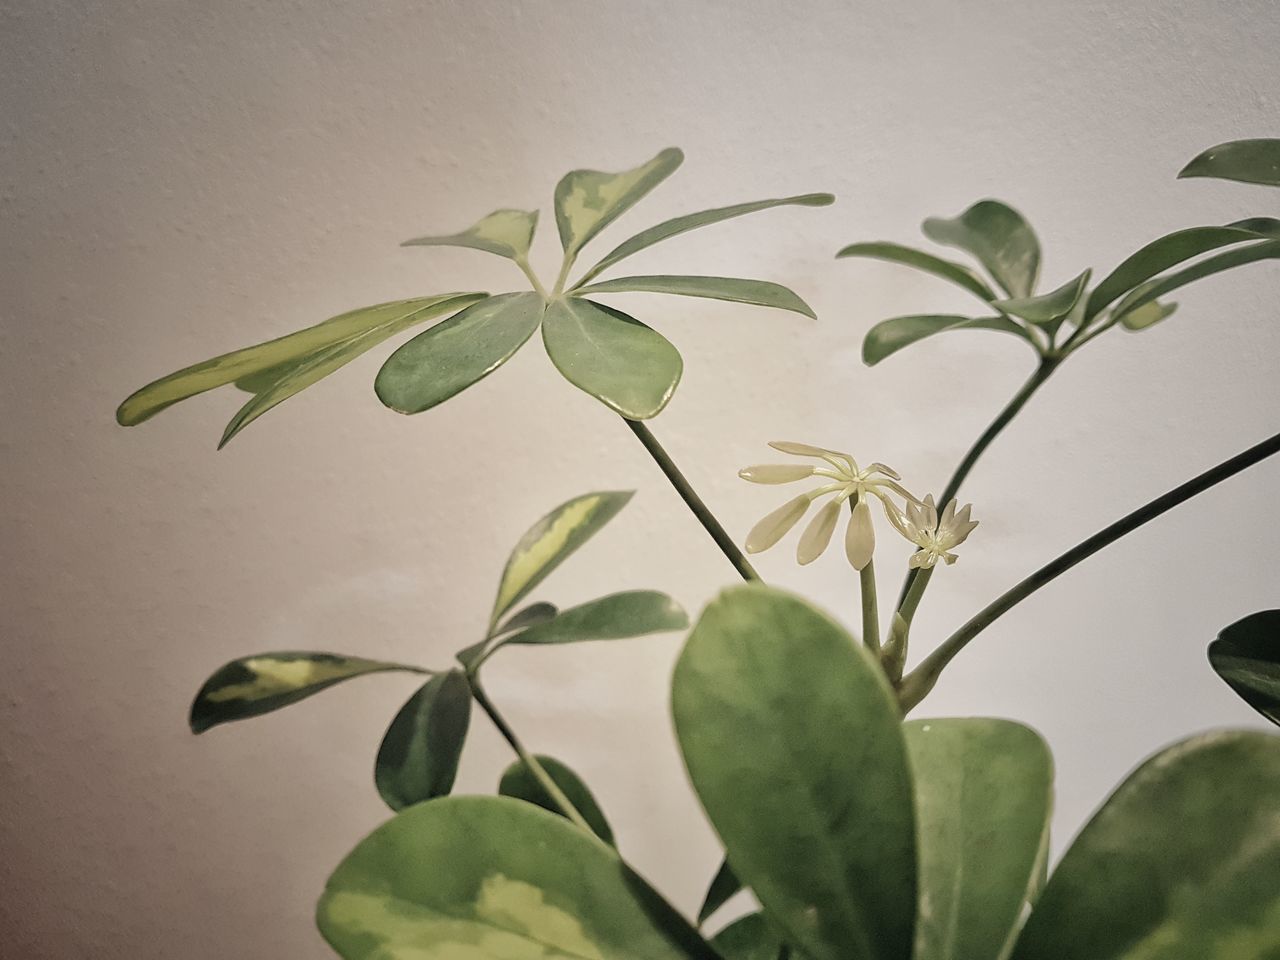 CLOSE-UP OF GREEN LEAVES AGAINST WALL